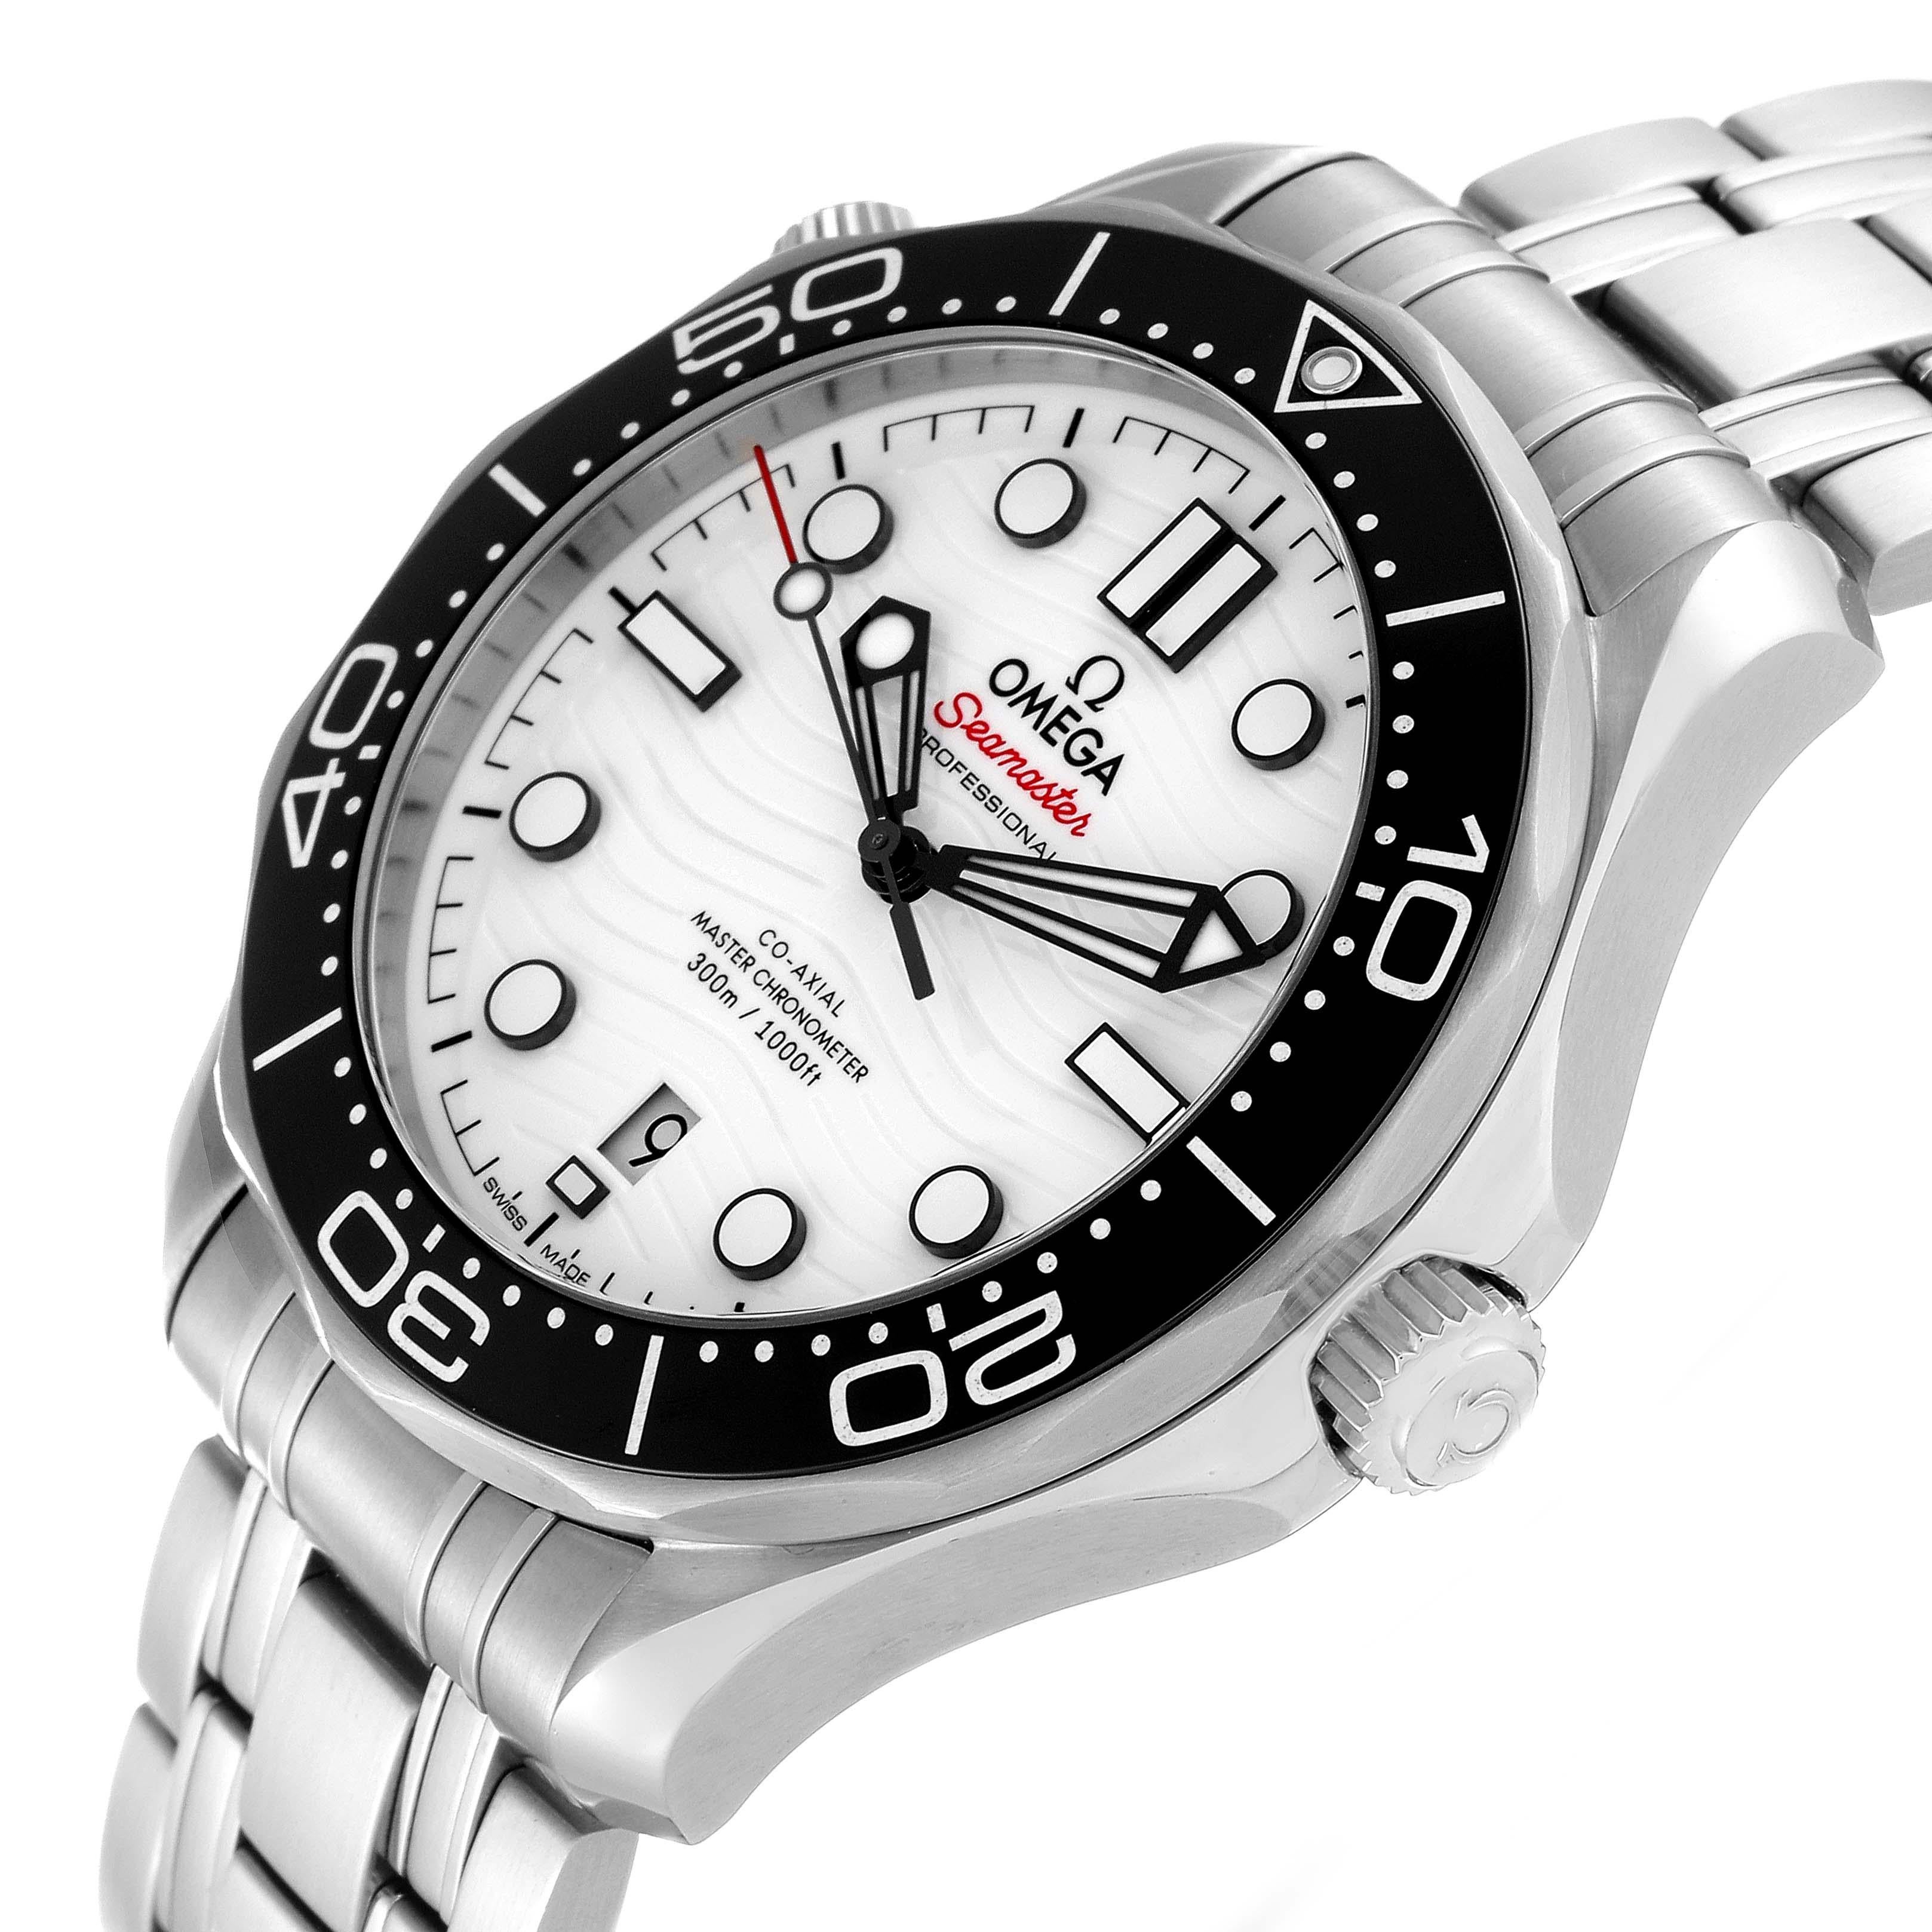 Omega Seamaster Diver 300M Steel Mens Watch 210.30.42.20.04.001 Box Card For Sale 4